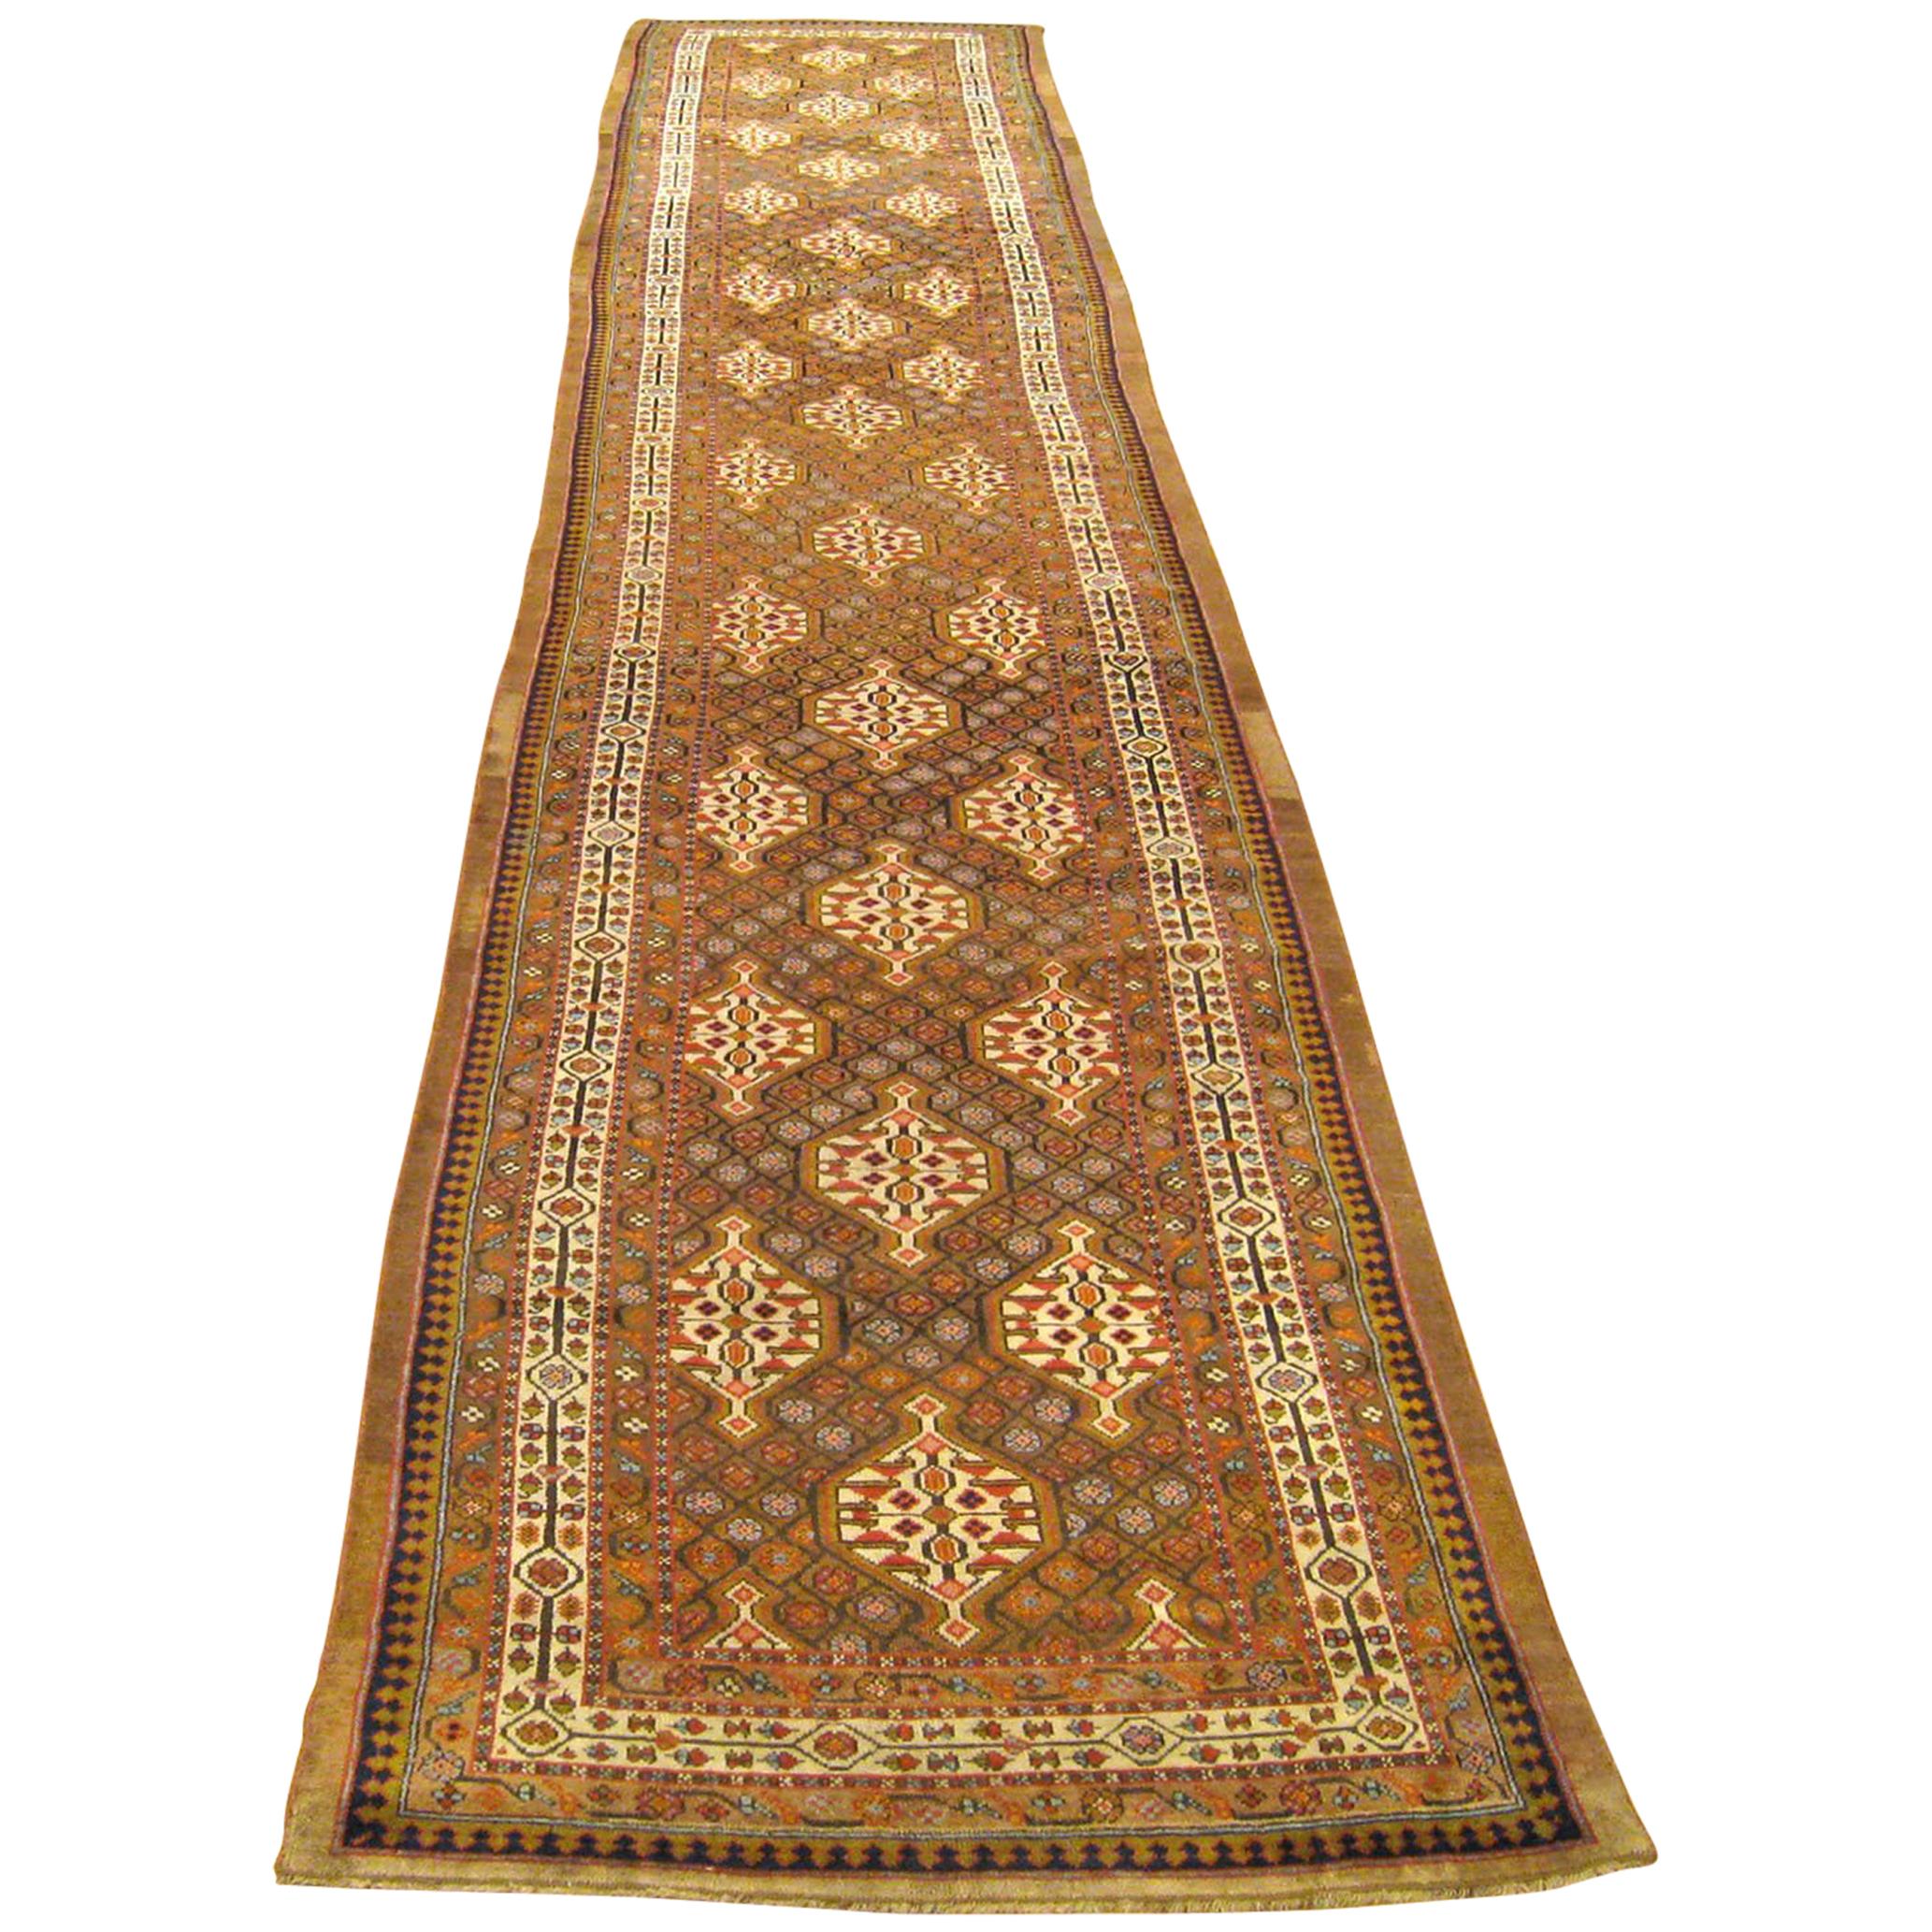 An antique Persian Hamadan Camel Hair oriental rug, in long runner size, with a repeat design in the central field.  Circa 1900.  Size 21'9 x 3'9.  This antique hand-knotted wool runner features an allover lozenge design surrounded by repeating